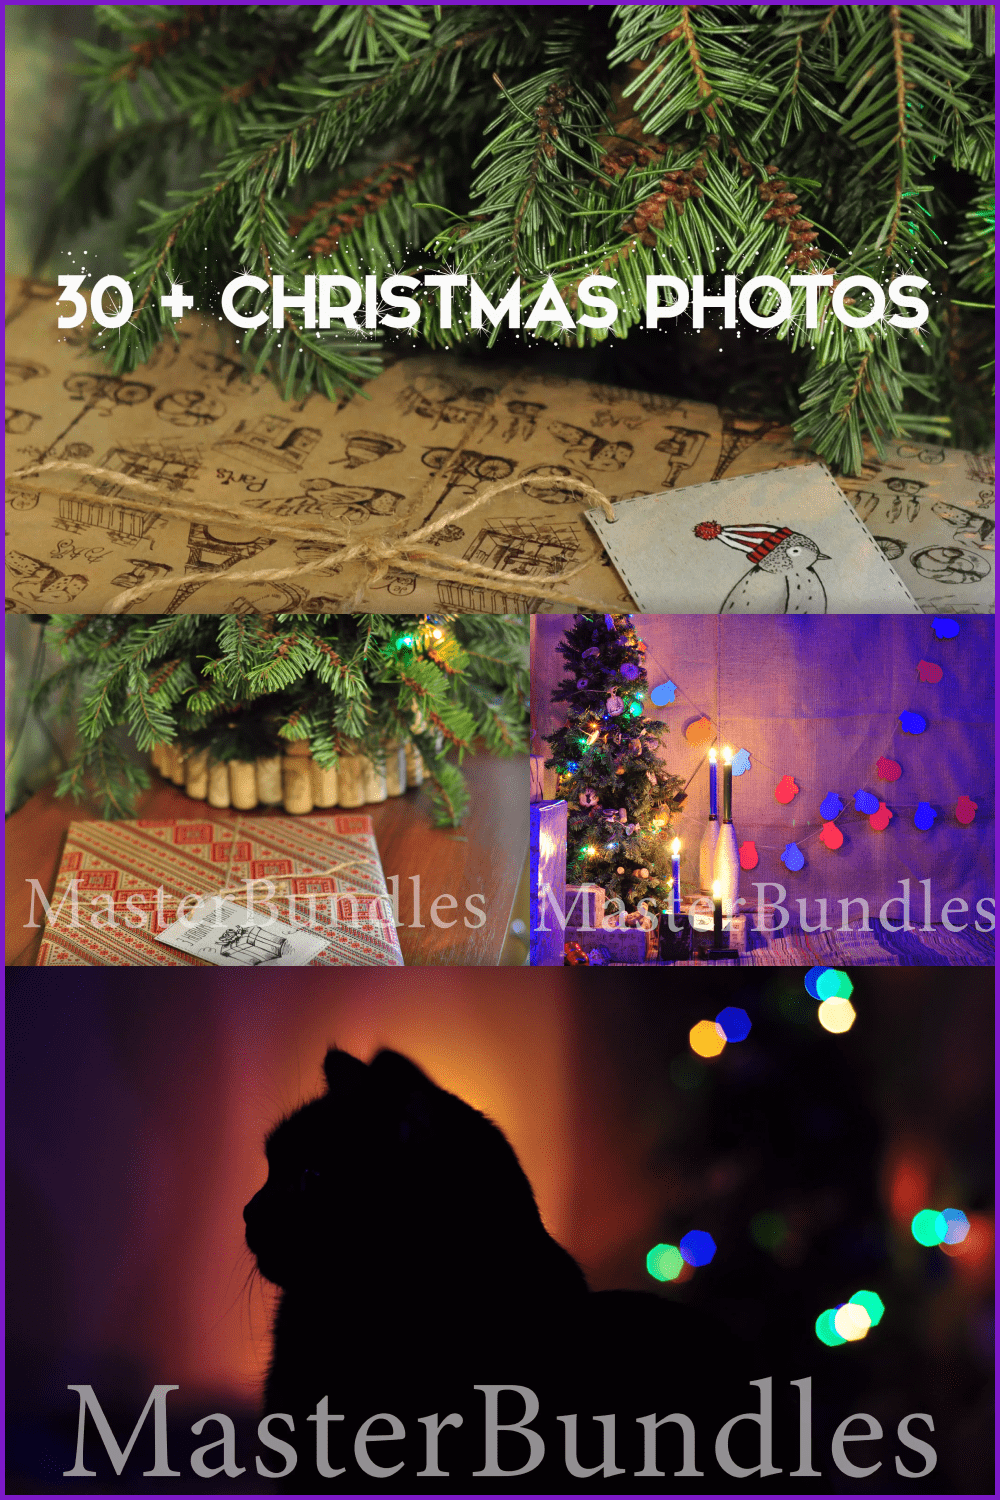 A collage of photos of a Christmas tree, decorations, a cat on the background of garlands.